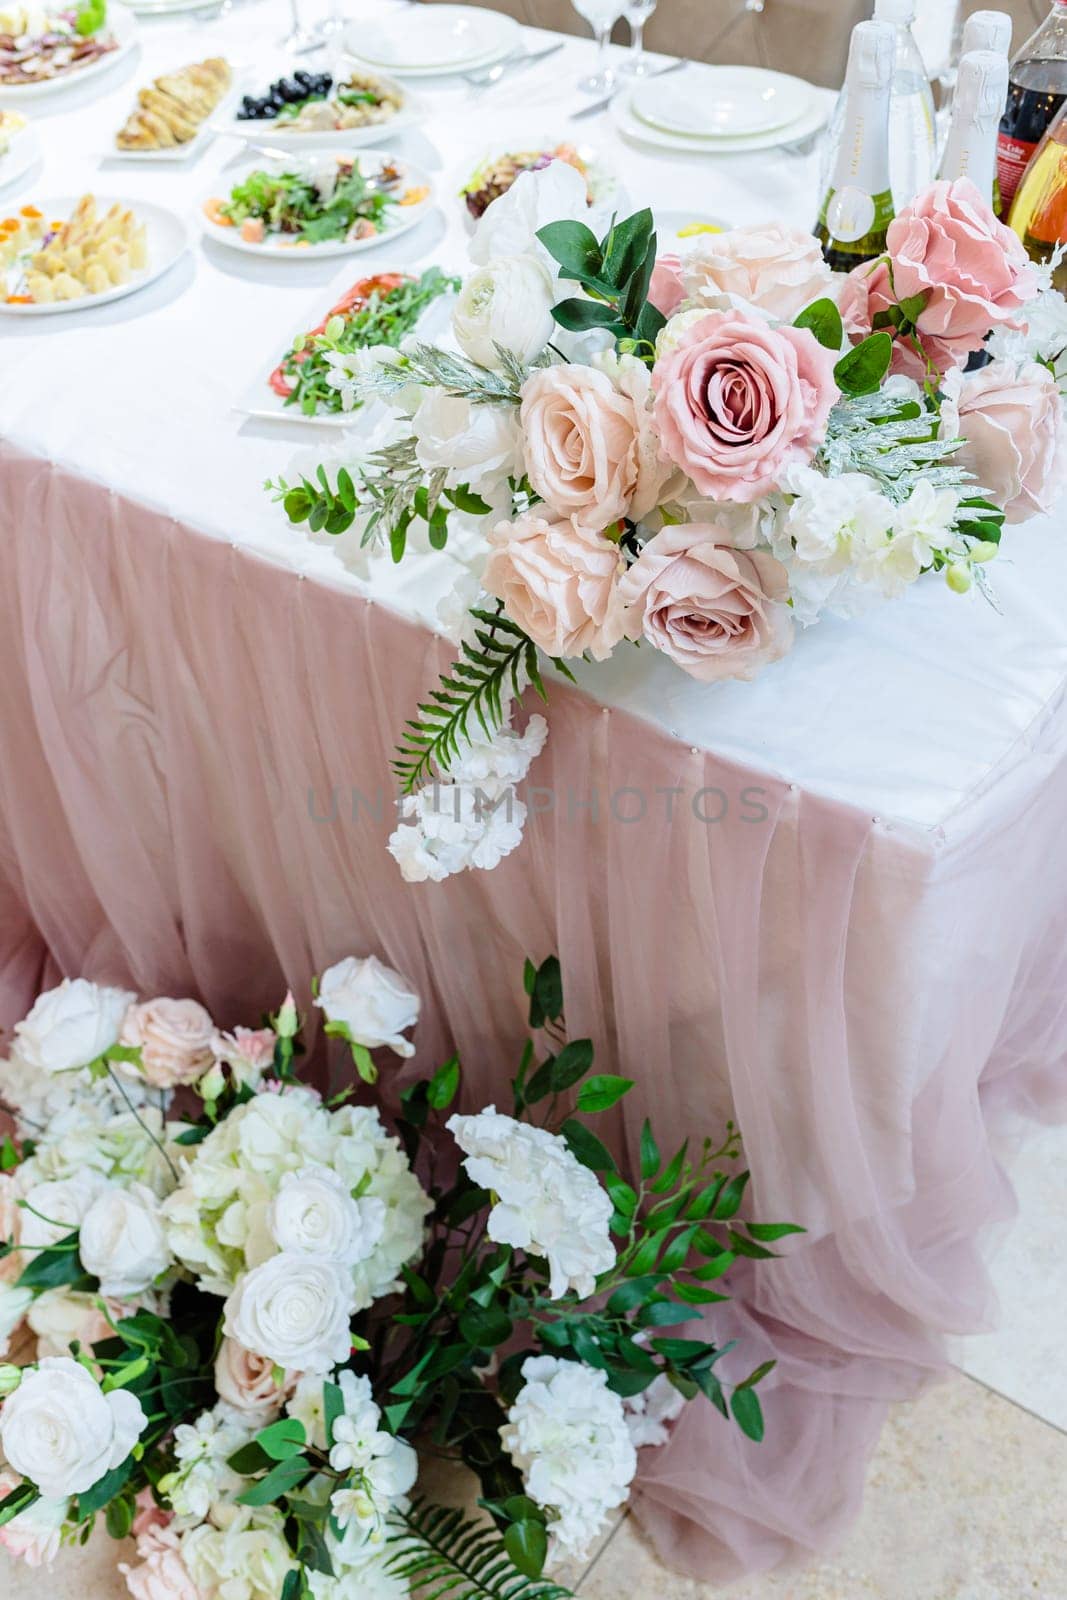 Wedding table decor for newlyweds decorations with fresh flowers by Dmitrytph